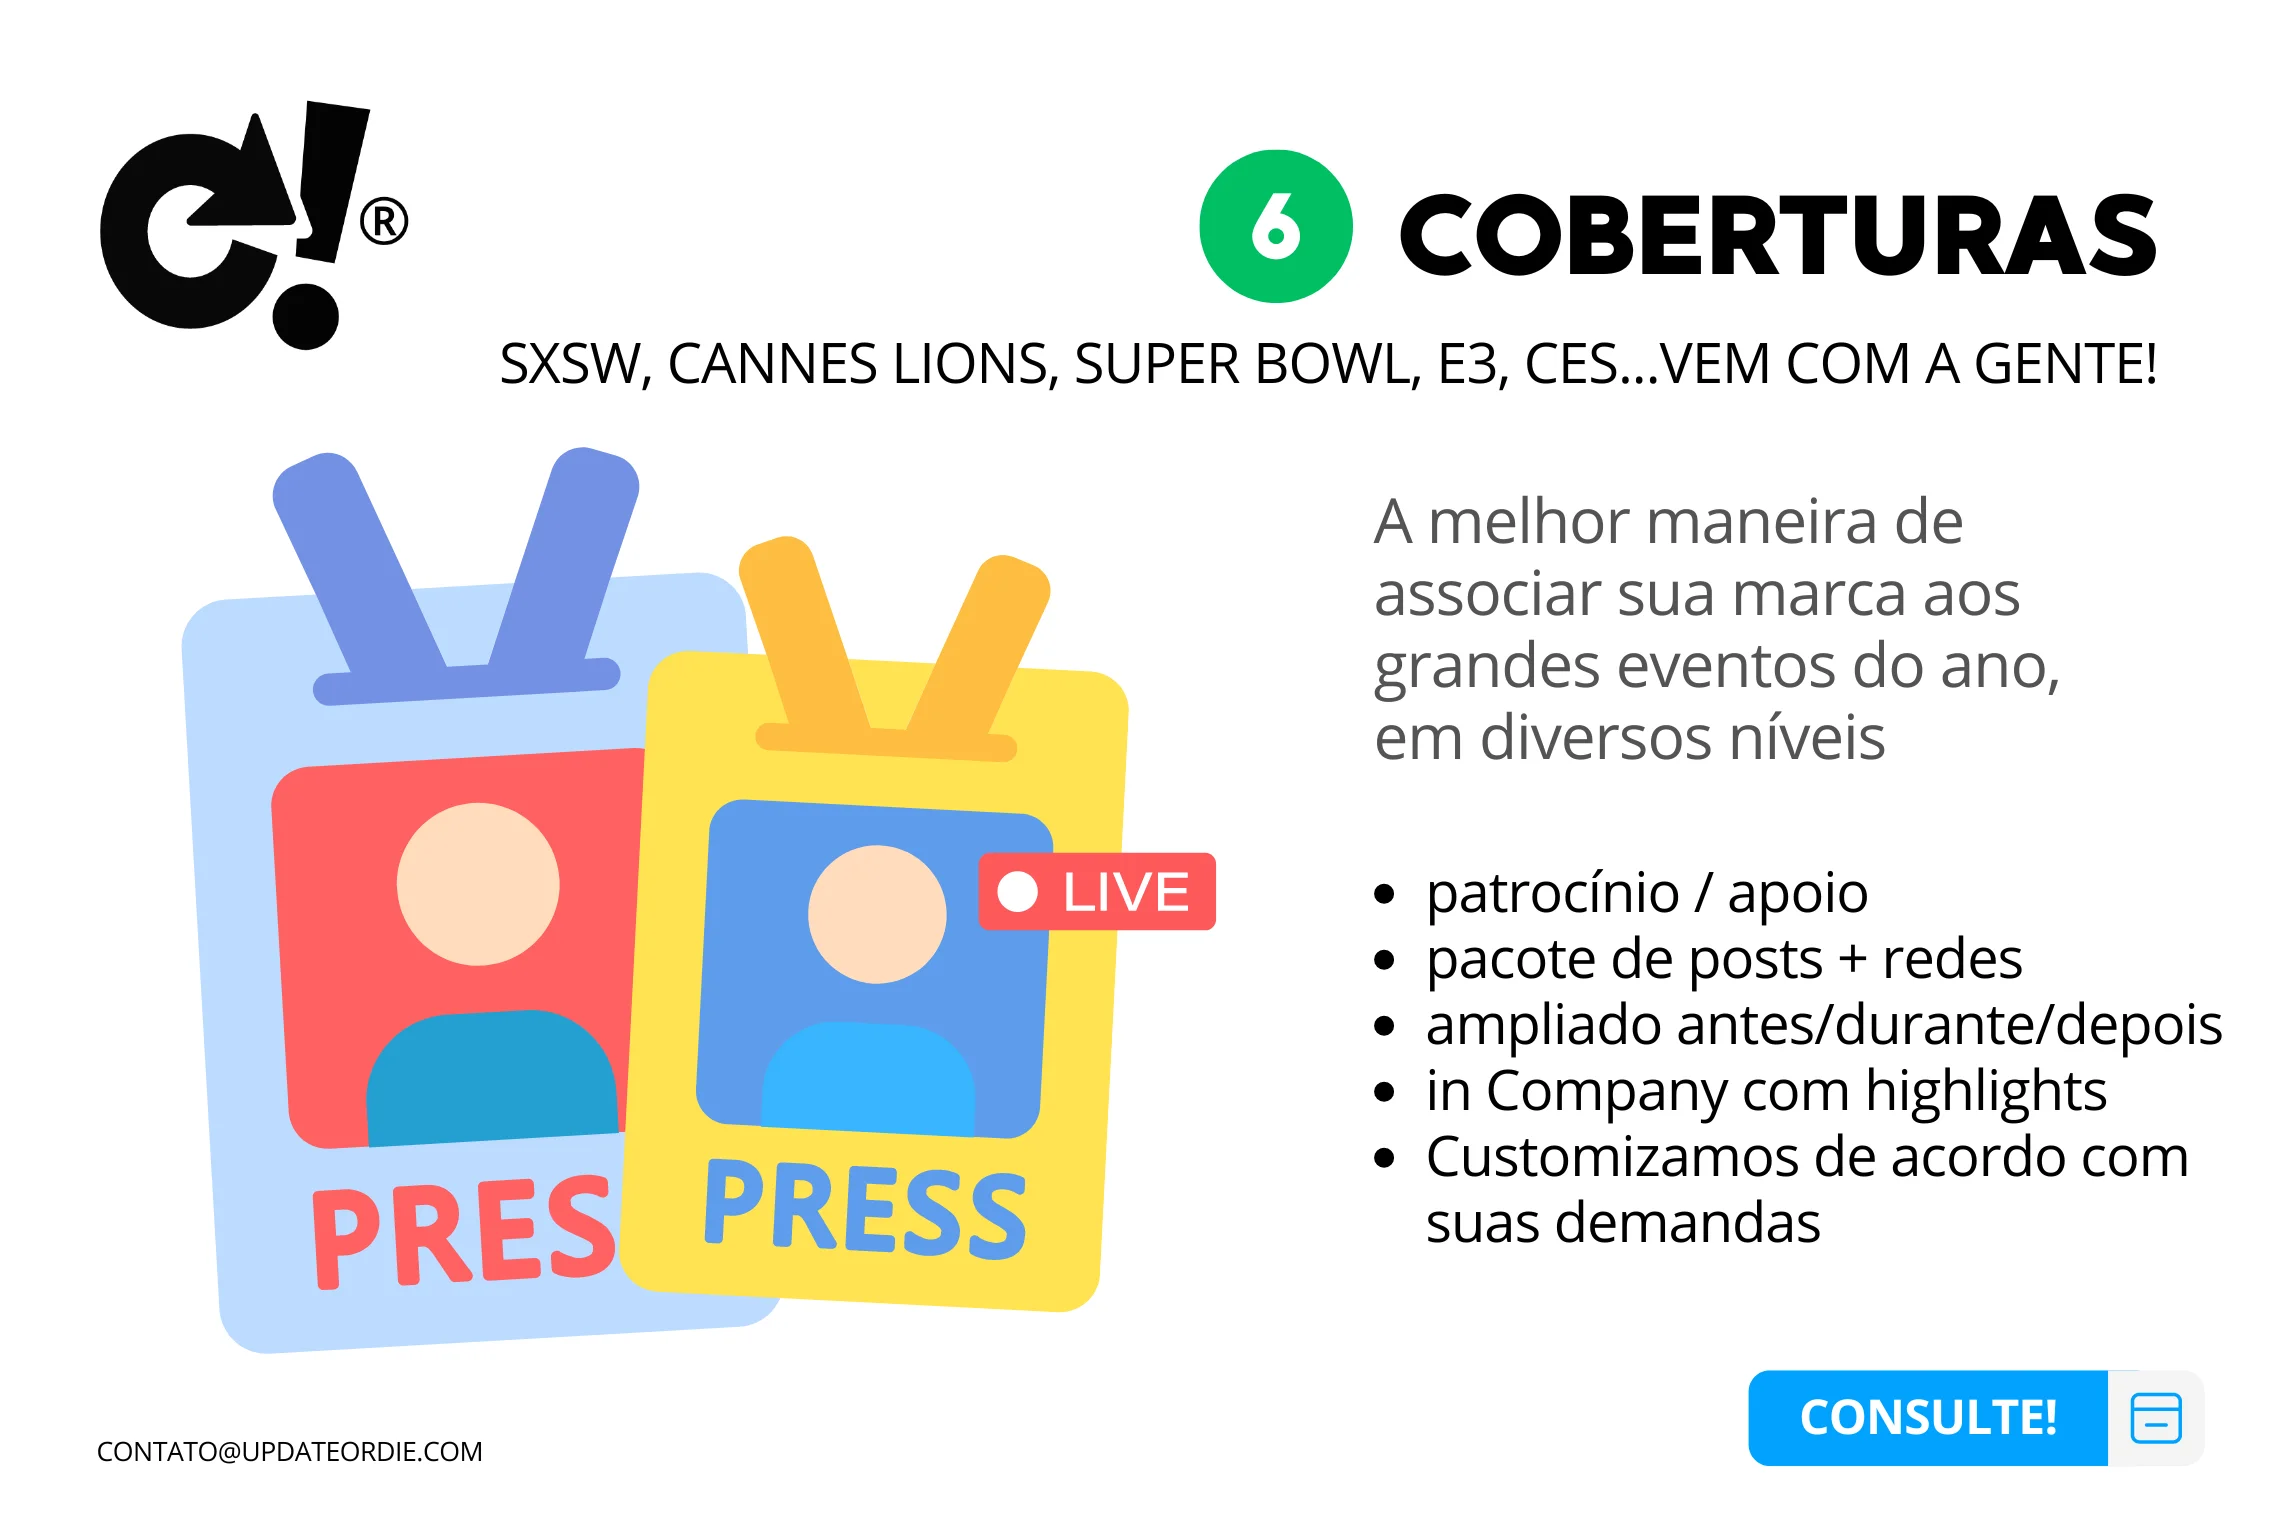 Promotional material for event coverage services including SXSW, Cannes Lions, Super Bowl, E3, CES with press badges and contact information in Portuguese.